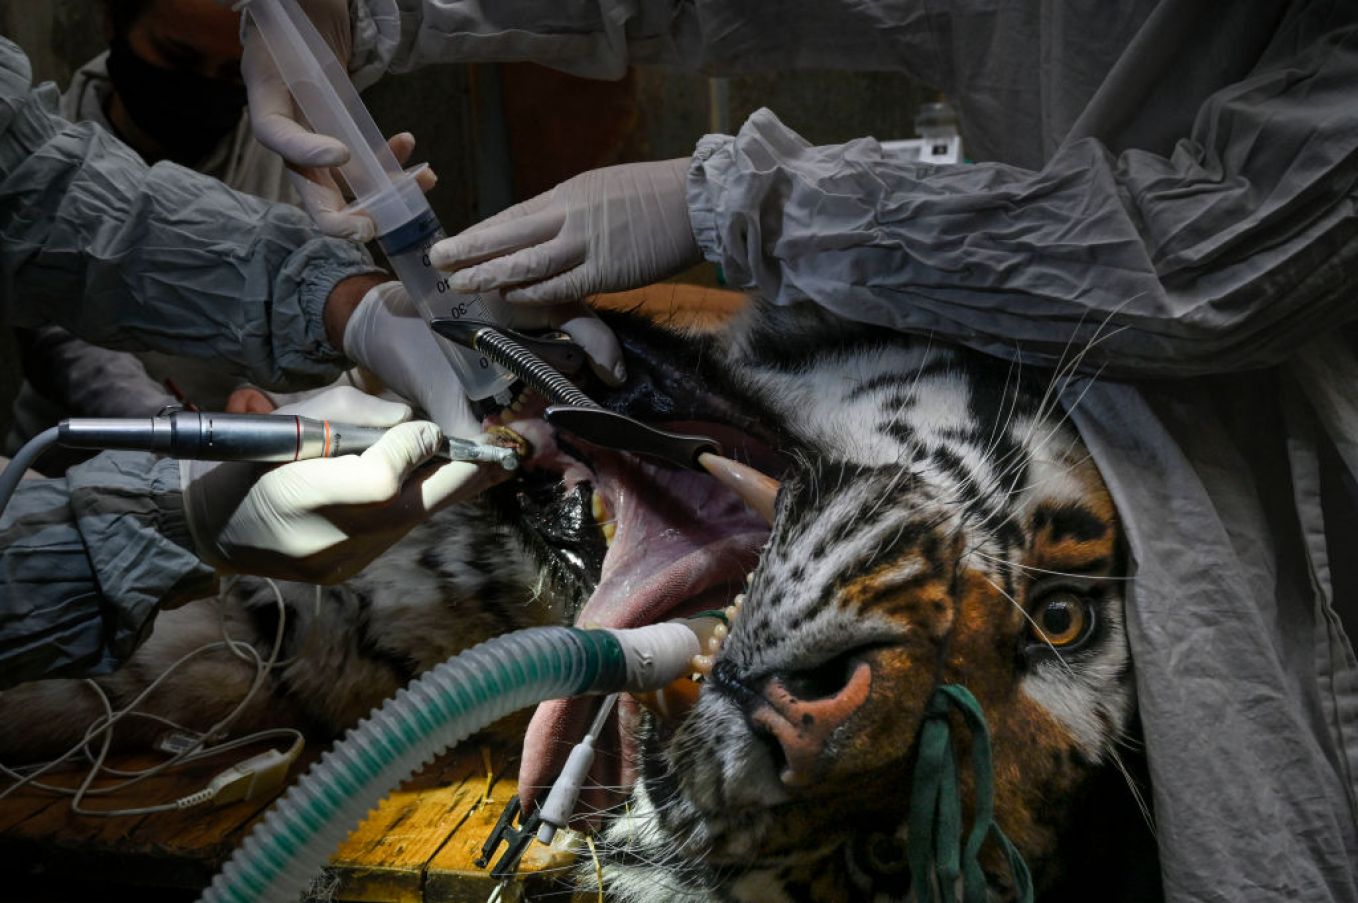 Baikal, A 14-Year-Old Siberian Tiger, Undergoes A Dental Surgery To Cure An Infection, At The Mulhouse Zoological And Botanical Park In France. Photo: Seabstien Bozon/ Afp Via Getty Images